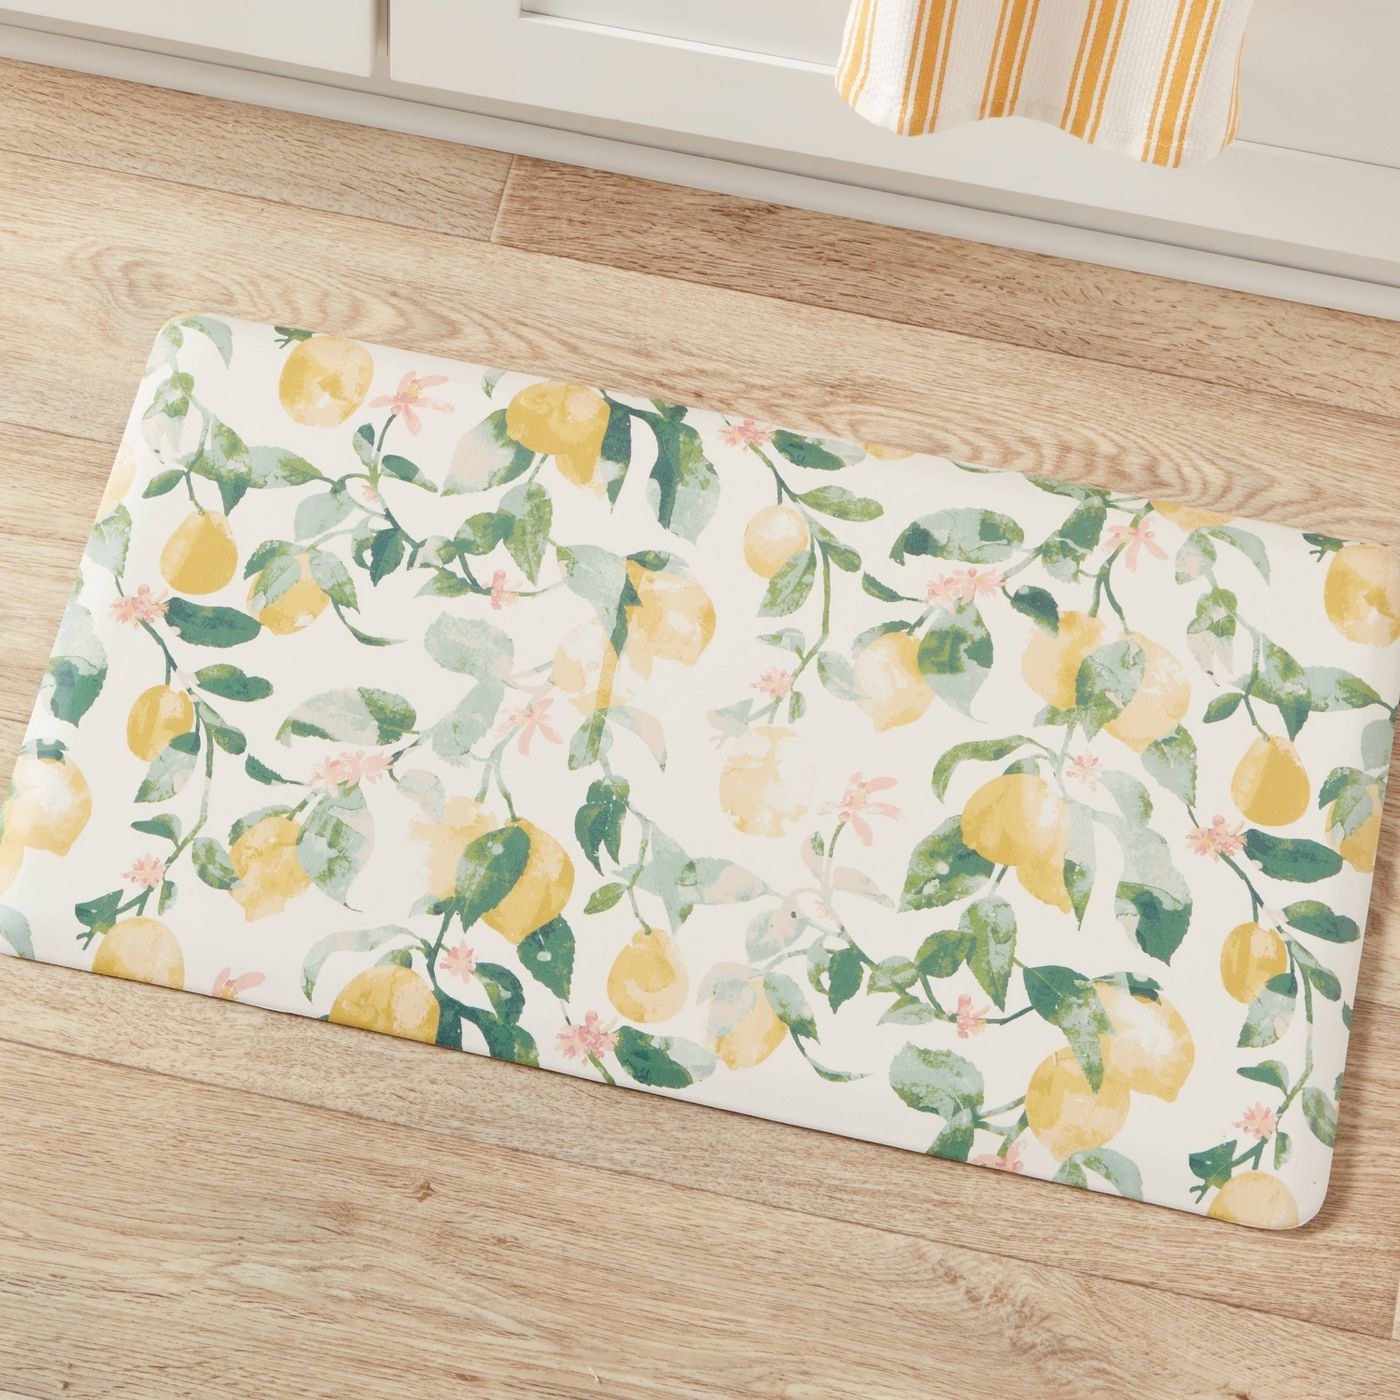 the white mat printed with lemons